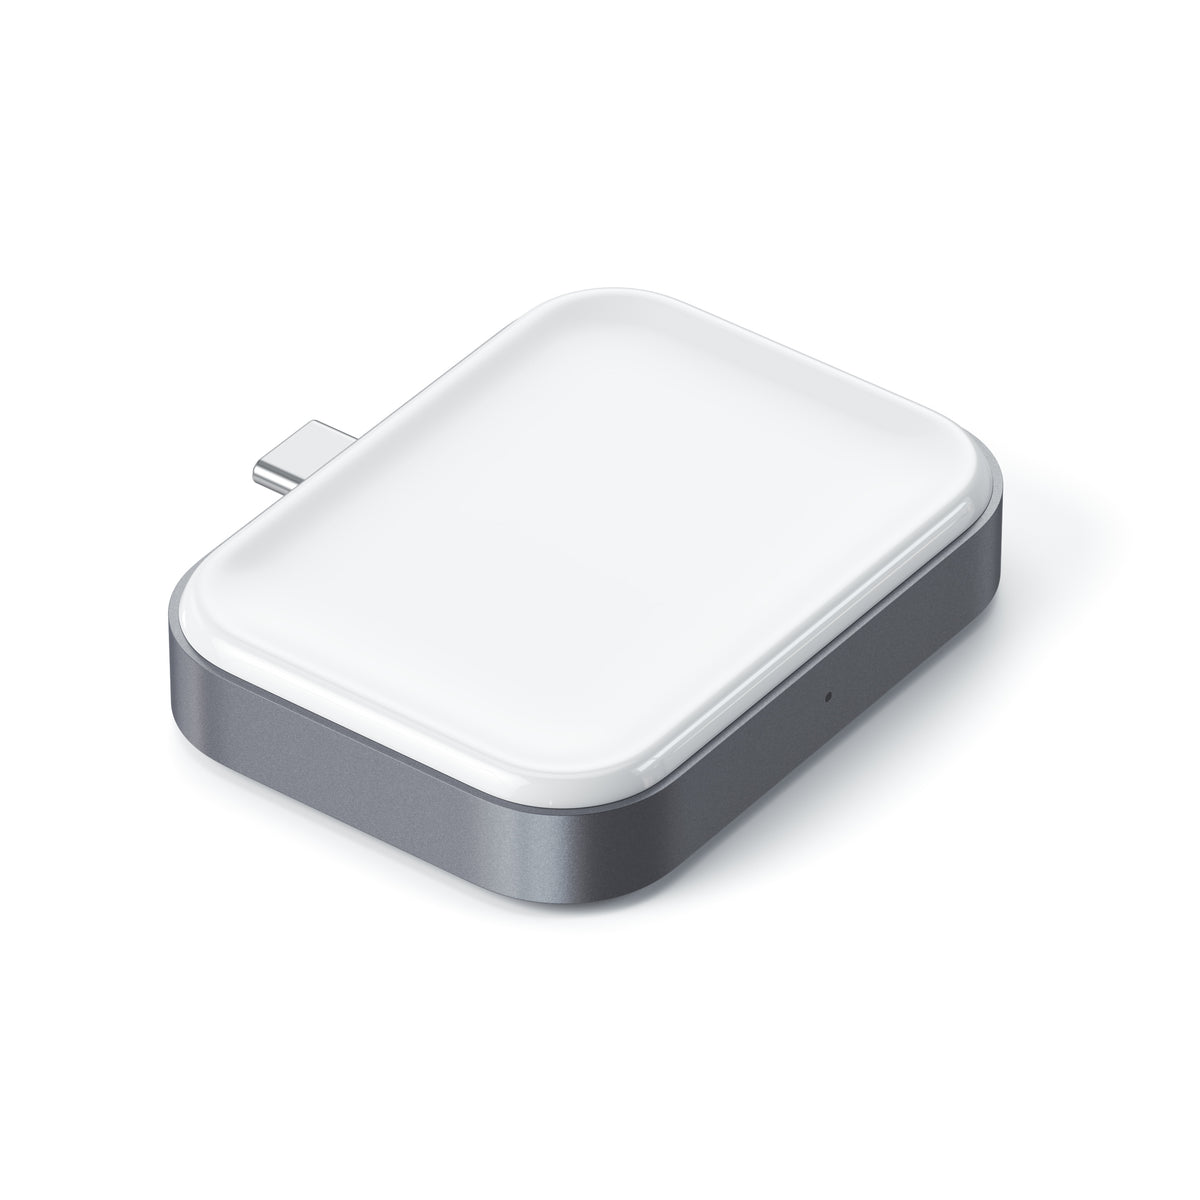 SATECHI USB-C Wireless Charging Dock for AirPods &amp; Airpods Pro - White